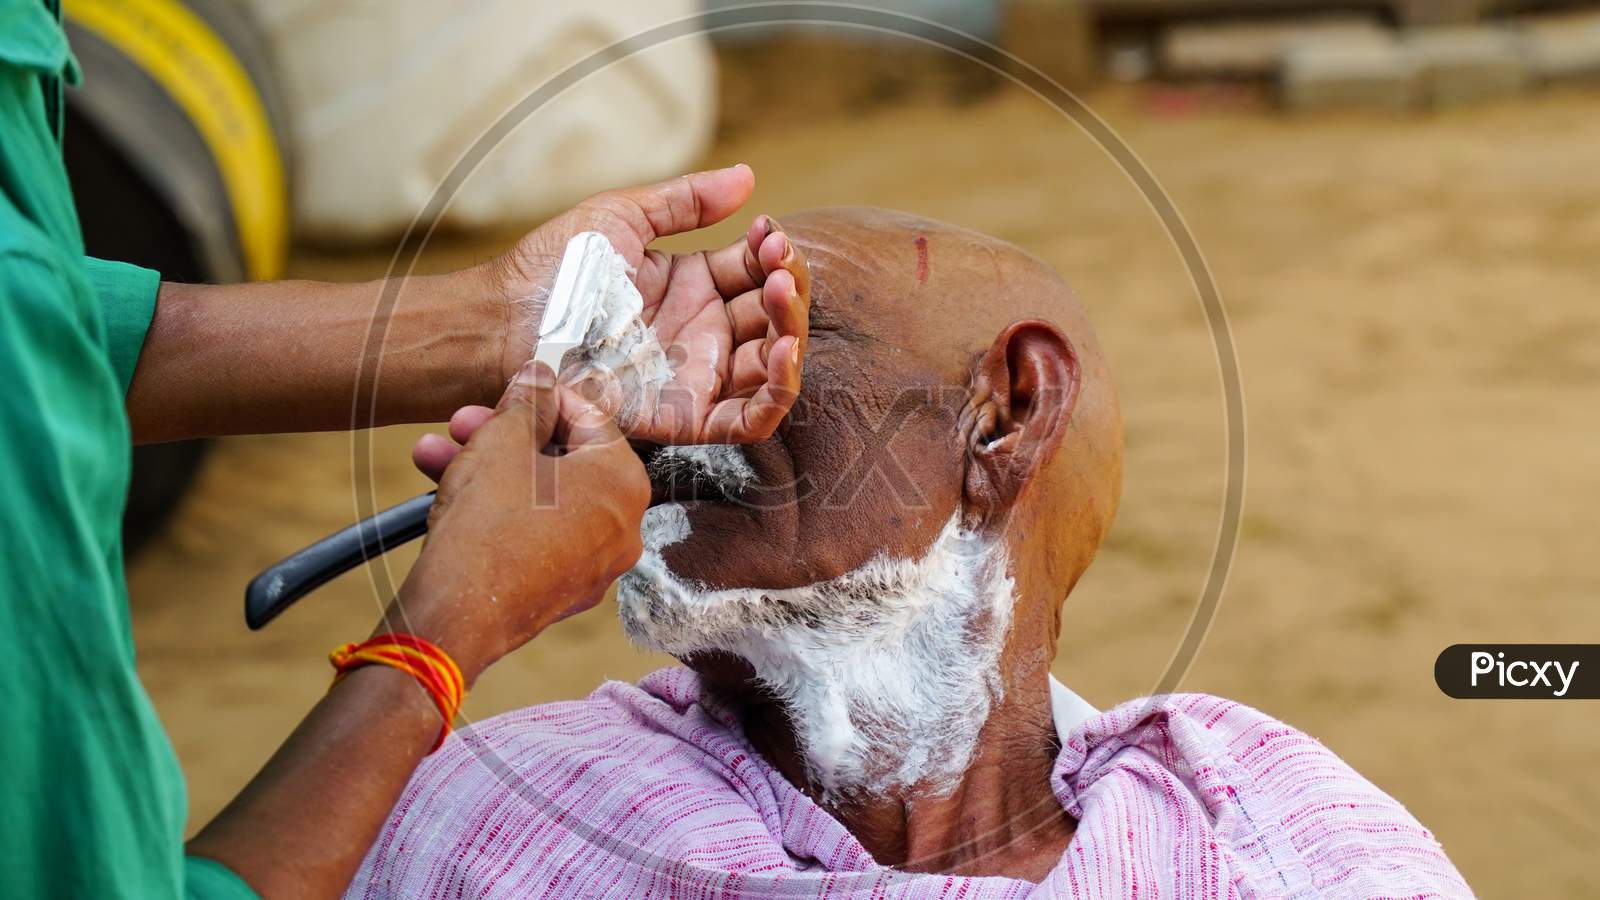 A Man Getting The Traditional Hair Cut At Home. Indian Barber Working On The Village Streets In A Sunny Day